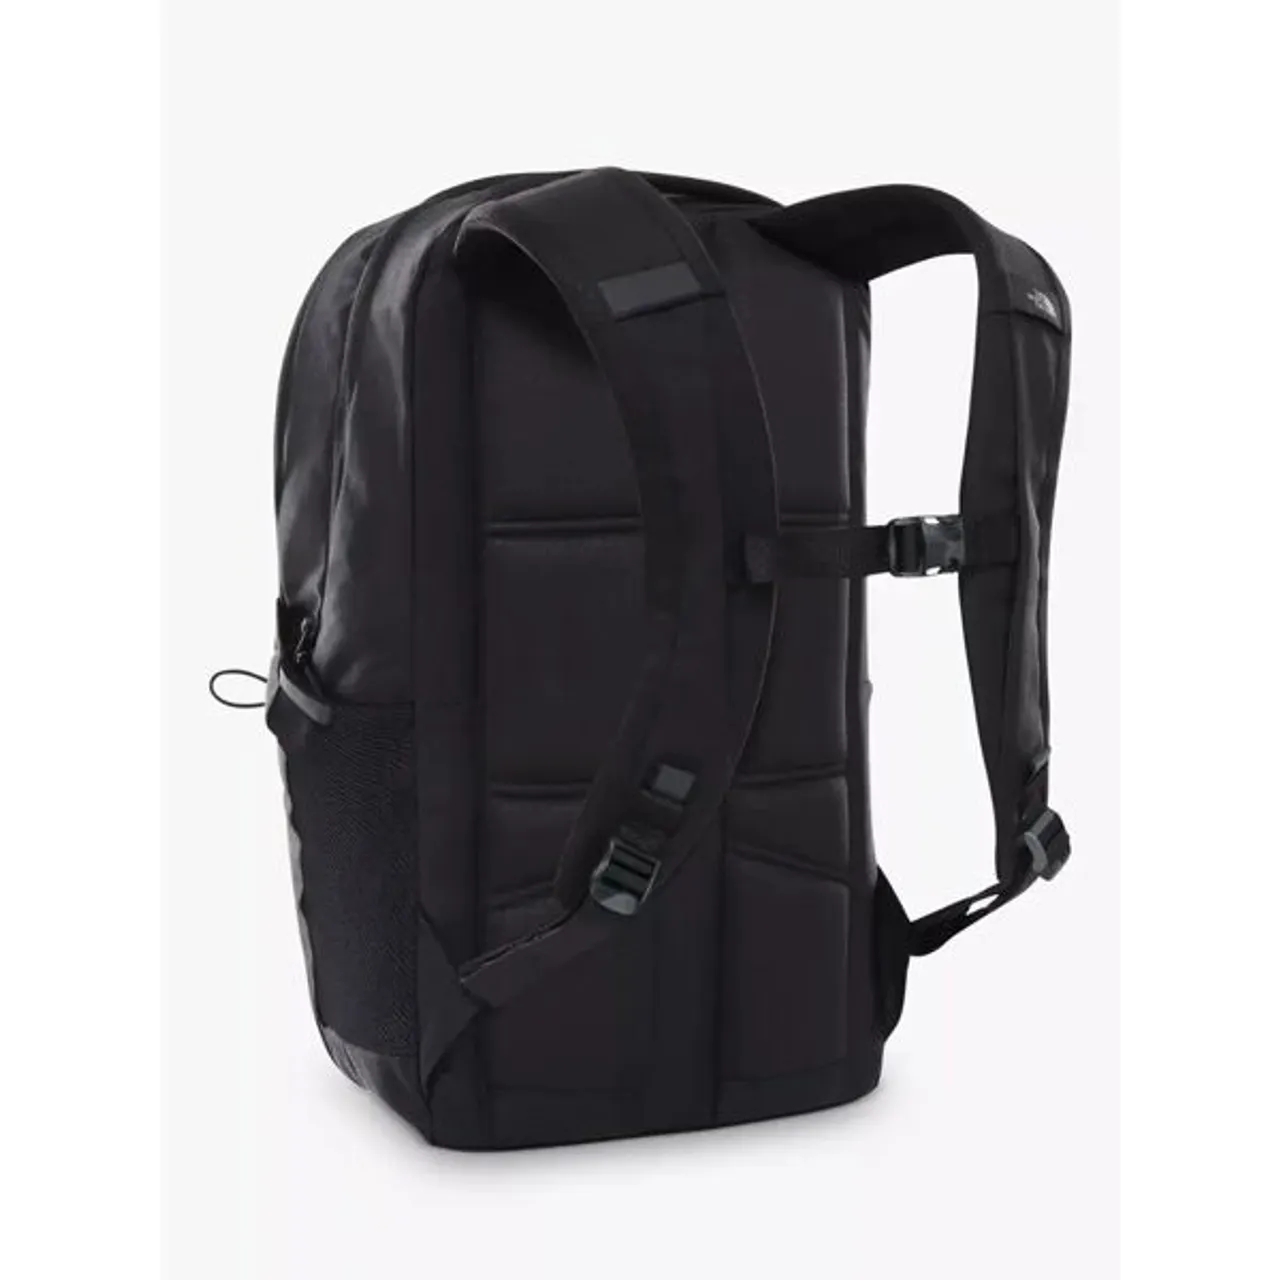 The North Face Jester Day Backpack - Black - Unisex